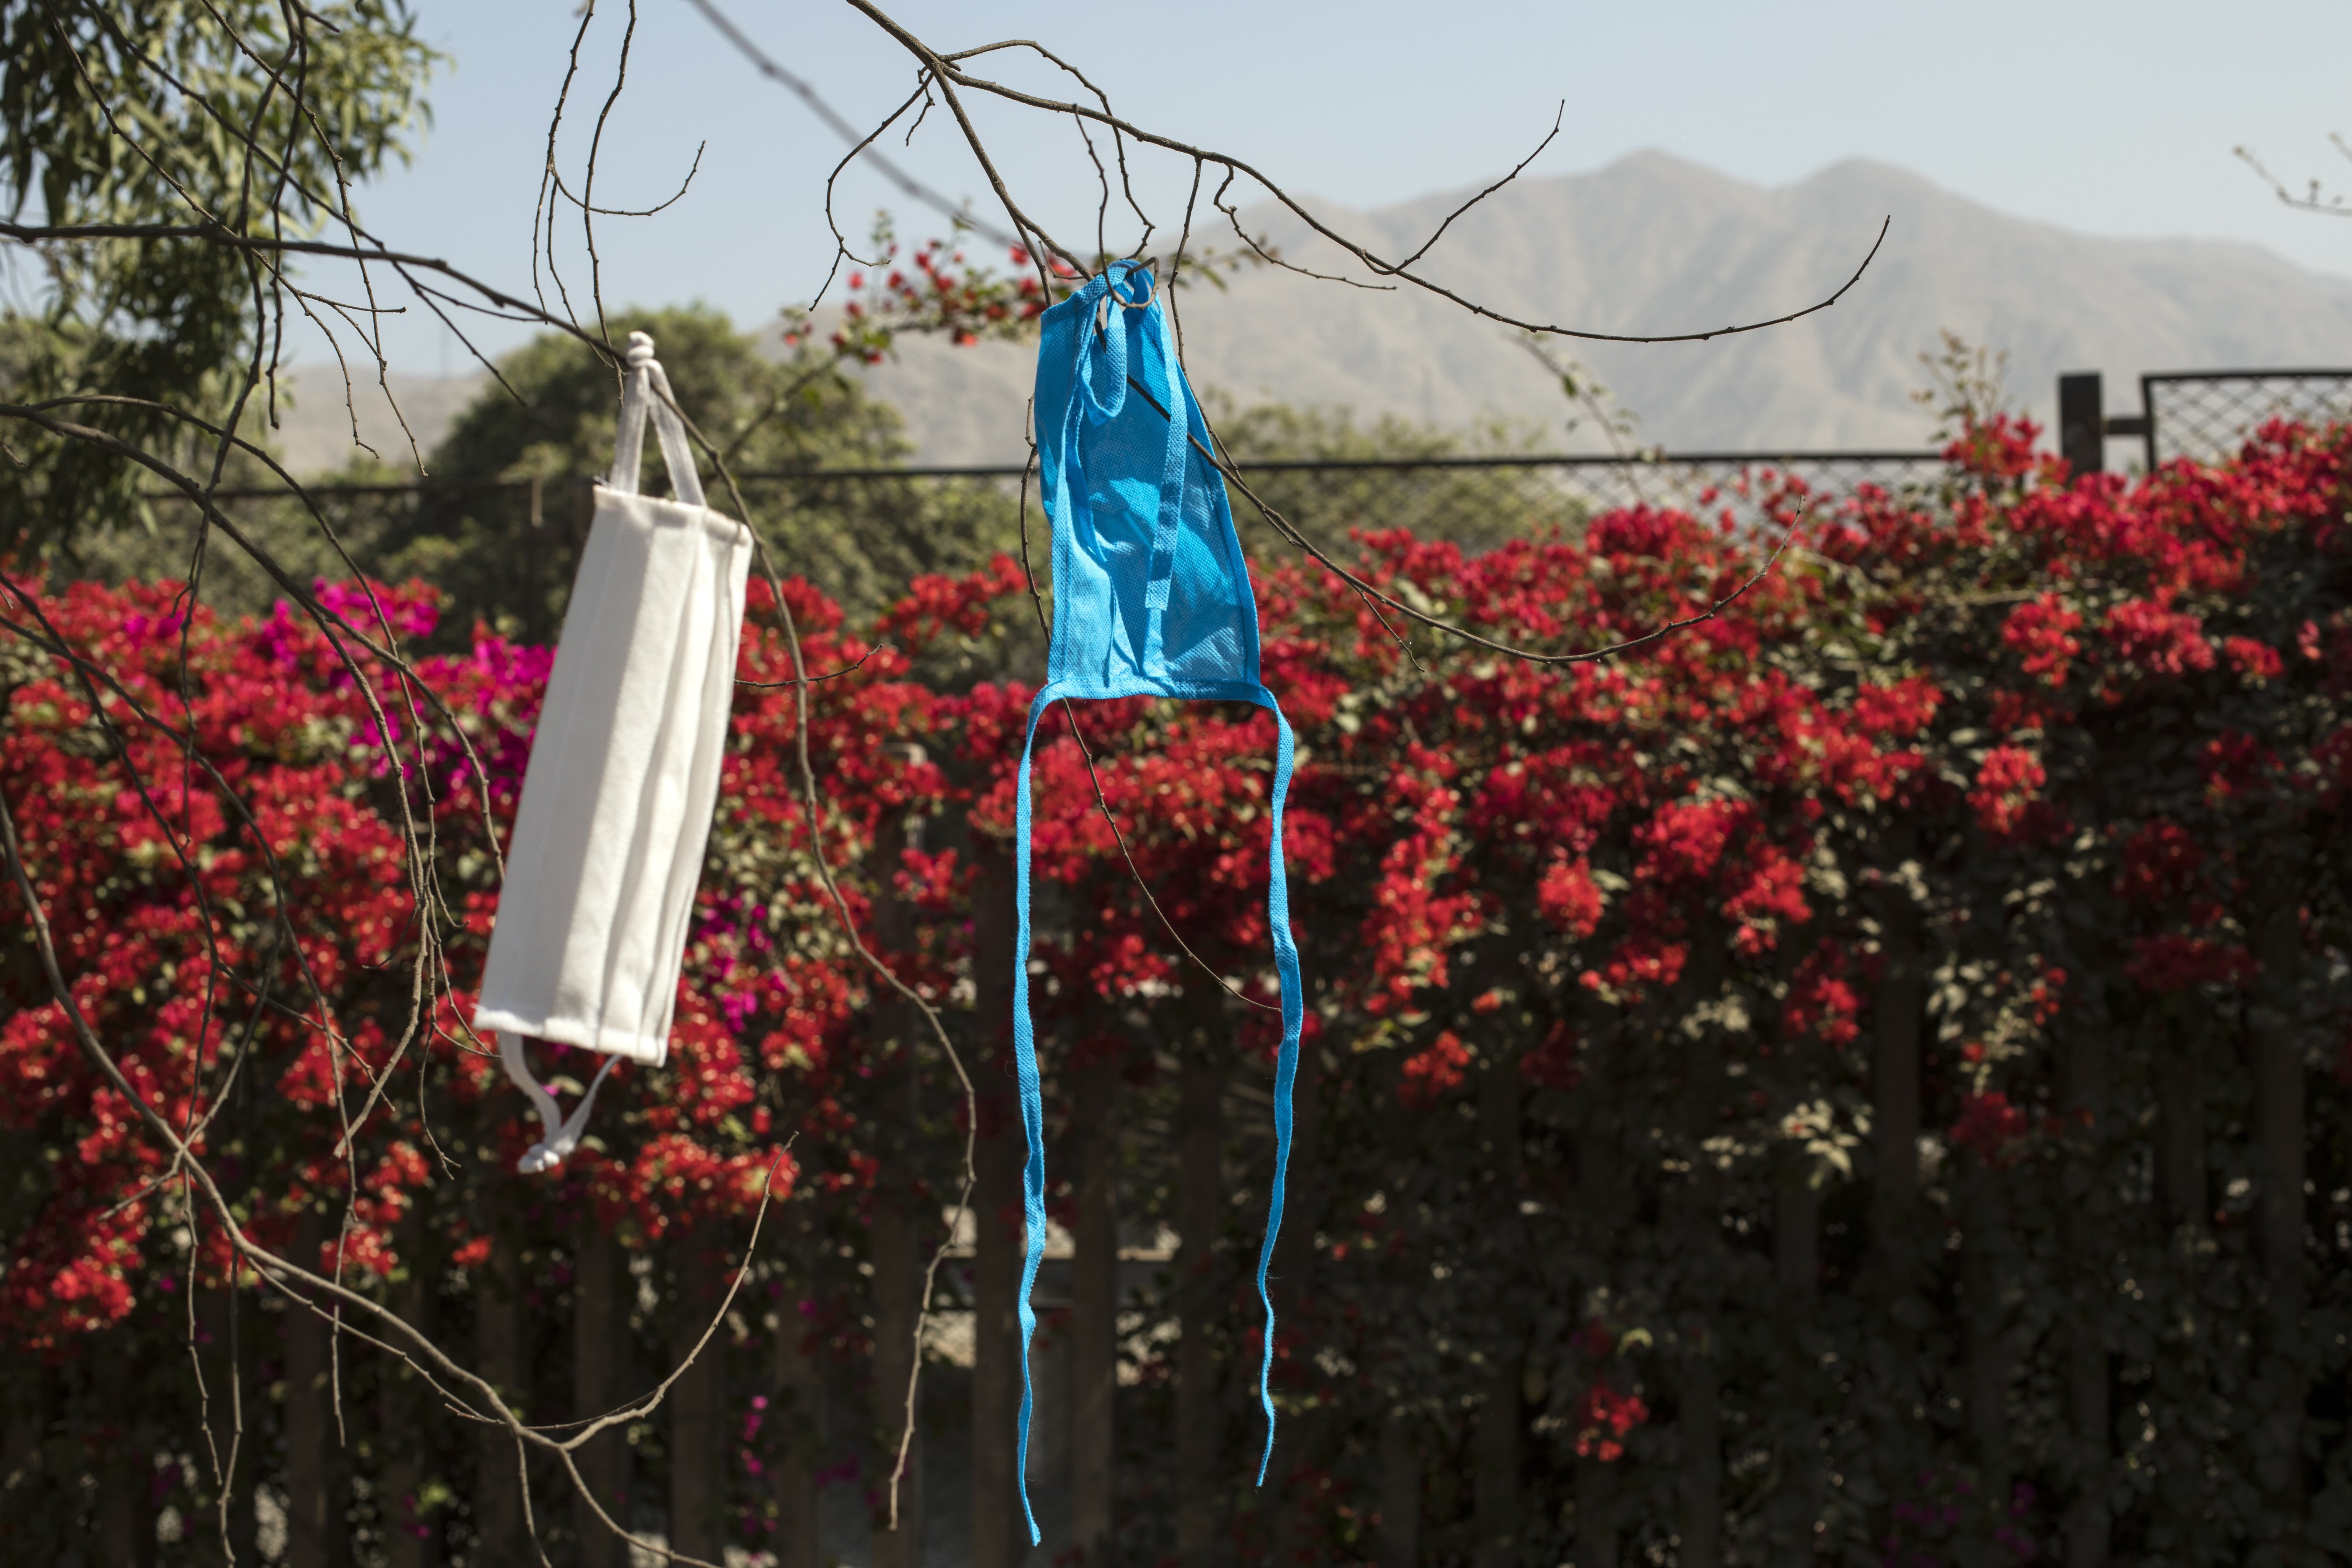 Protective masks hang from tree branches at a makeshift inhabited by day laborers and informal workers who usually eke out a living in Peru's capital, as they make their way home to the provinces, near Lima, Peru, Tuesday, April 21, 2020. After not being allowed to leave the capital because the strict quarantine rules amid the new coronavirus pandemic, day laborers and informal workers are now allowed to travel home. (AP Photo/Rodrigo Abd)